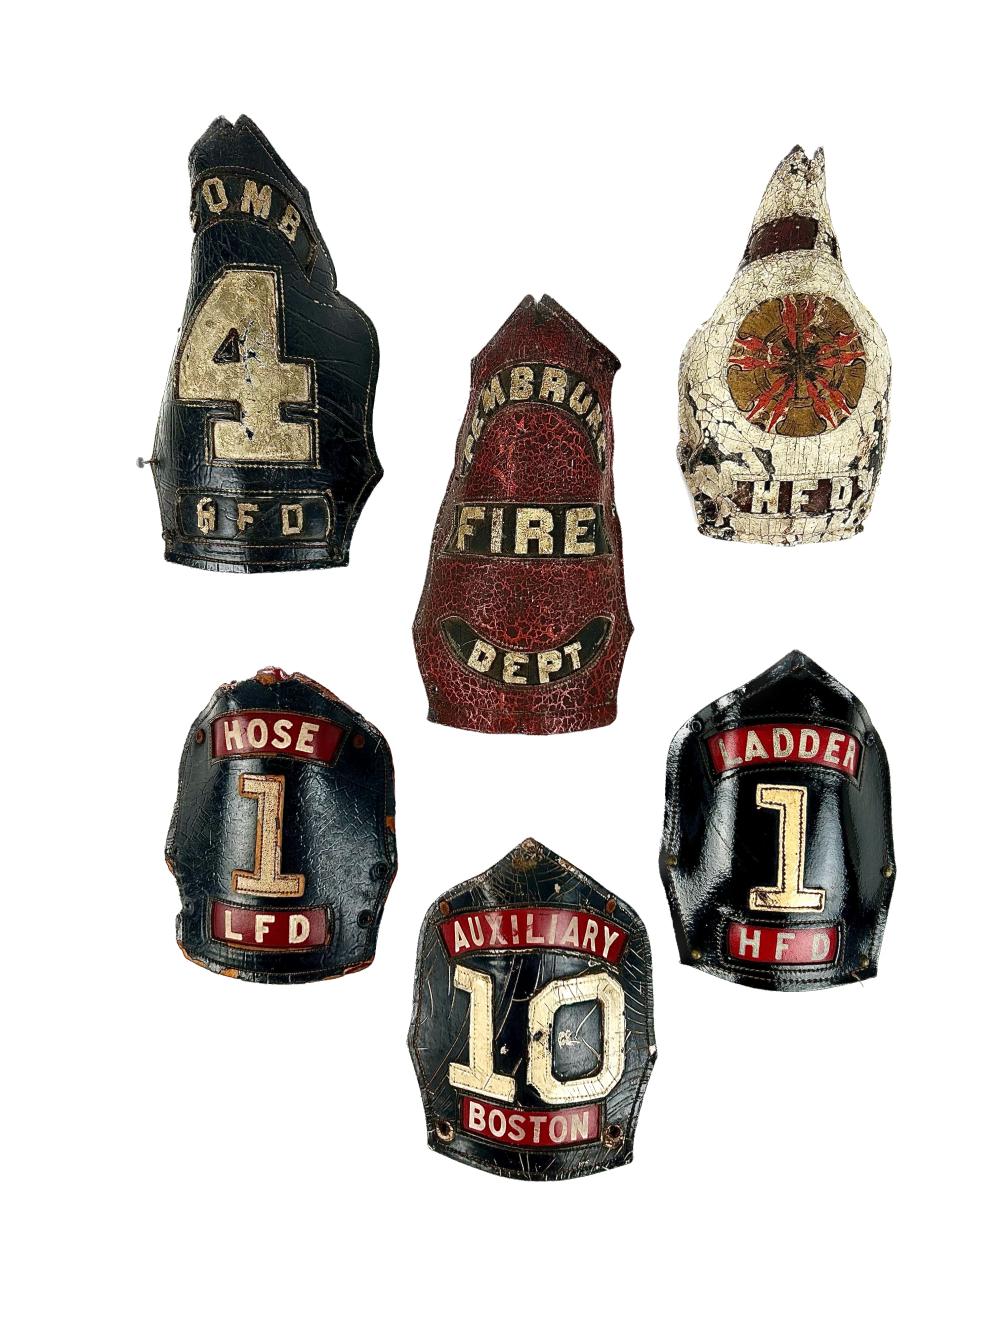 SIX LEATHER FIRE HELMET PLAQUES 3af7be